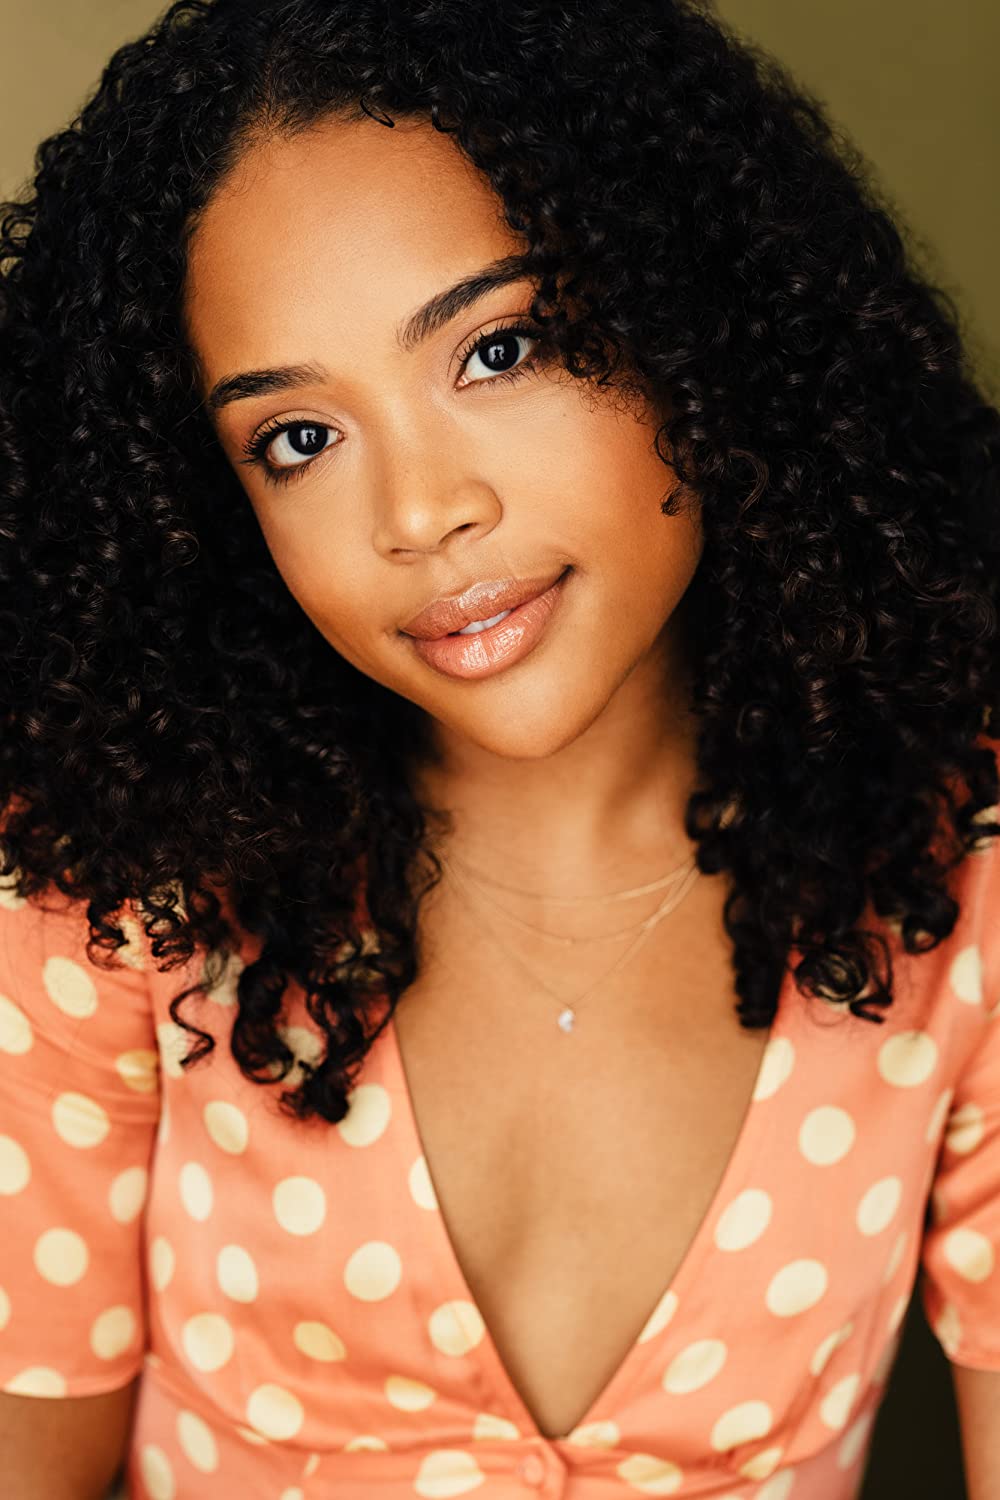 Exclusive: Candace Maxwell On Role in Tyler Perry's BET+ Series "All the Queen's Men"